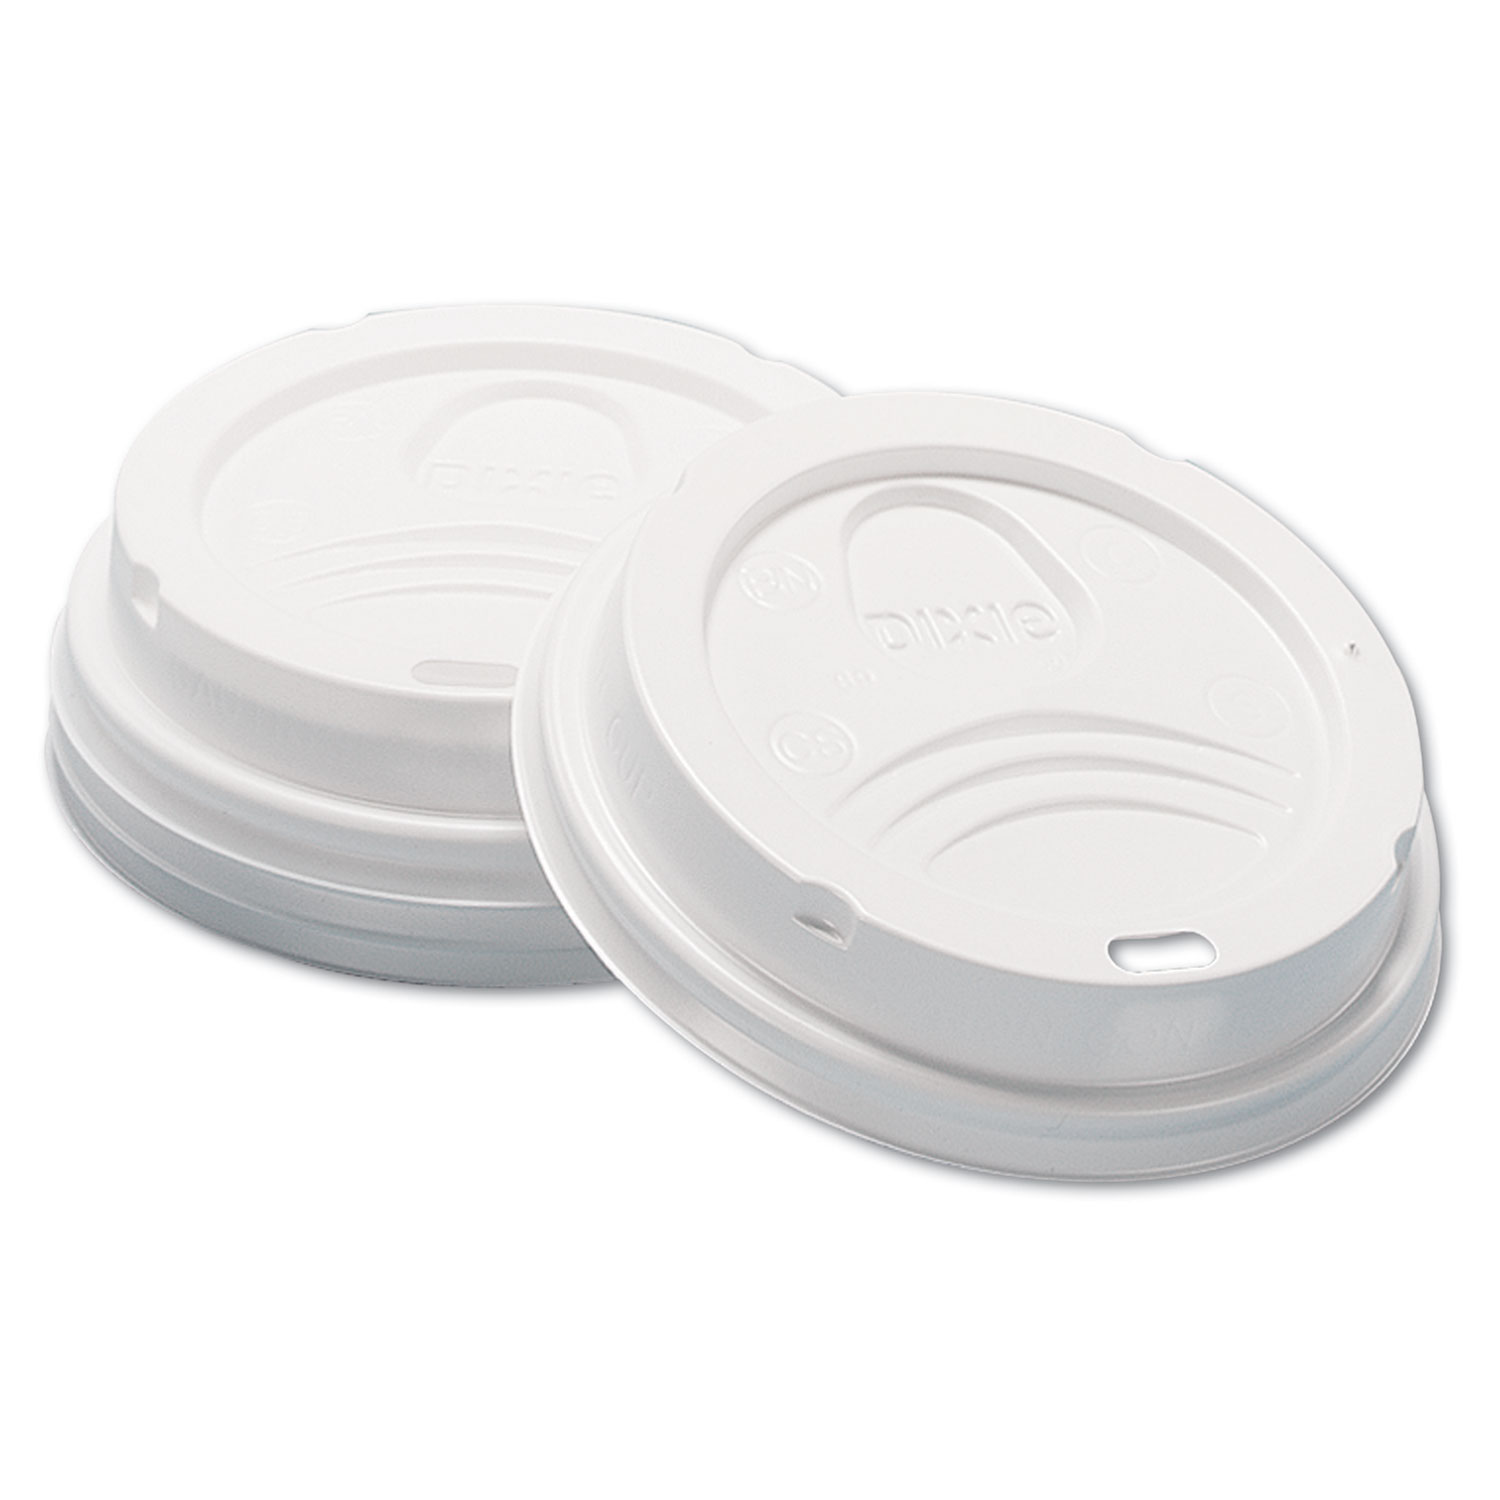  Dixie D9538 Dome Hot Drink Lids, 8oz Cups, White, 100/Sleeve, 10 Sleeves/Carton (DXED9538) 